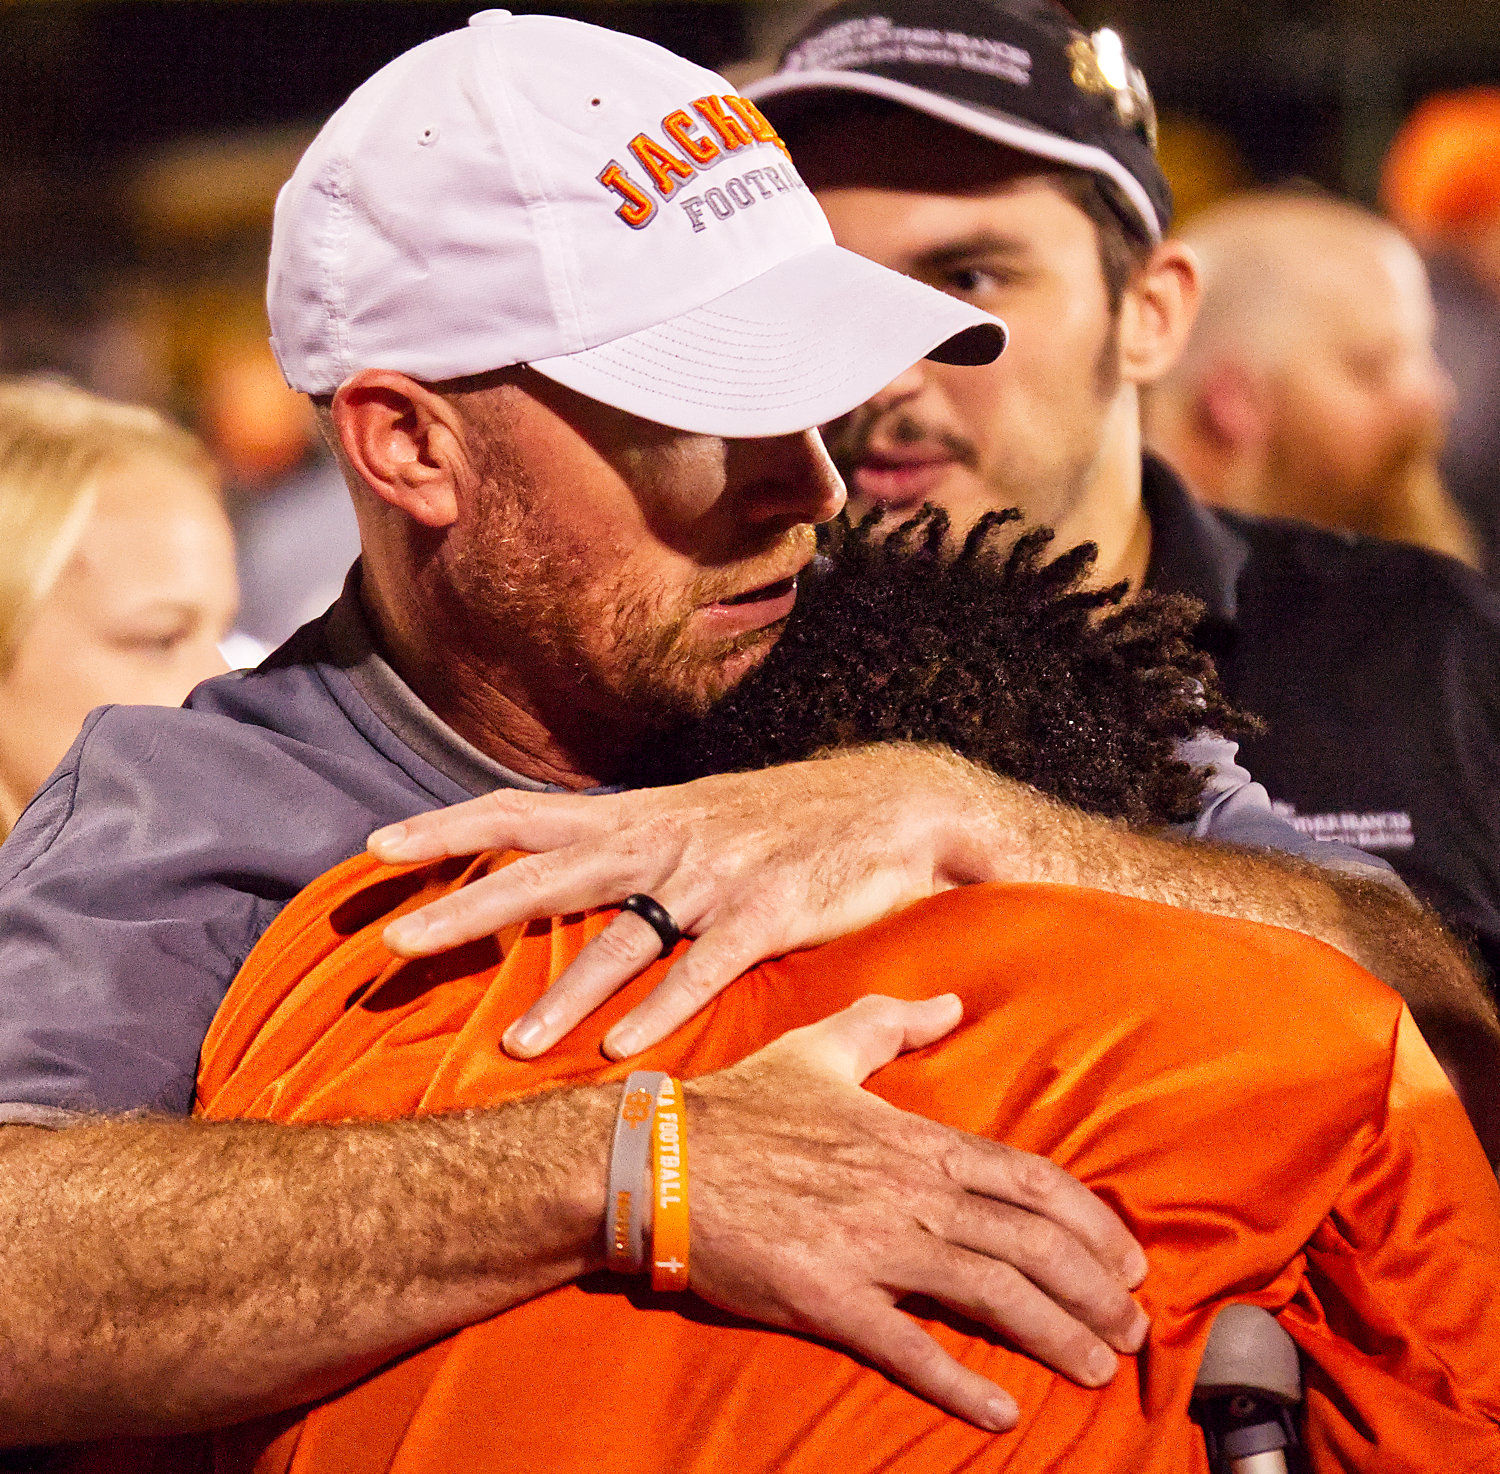 Mineola athletic director Luke Blackwell embraces senior Montrel Williams after a football game Sept. 29 against Big Sandy in which Williams suffered a season-ending injury.